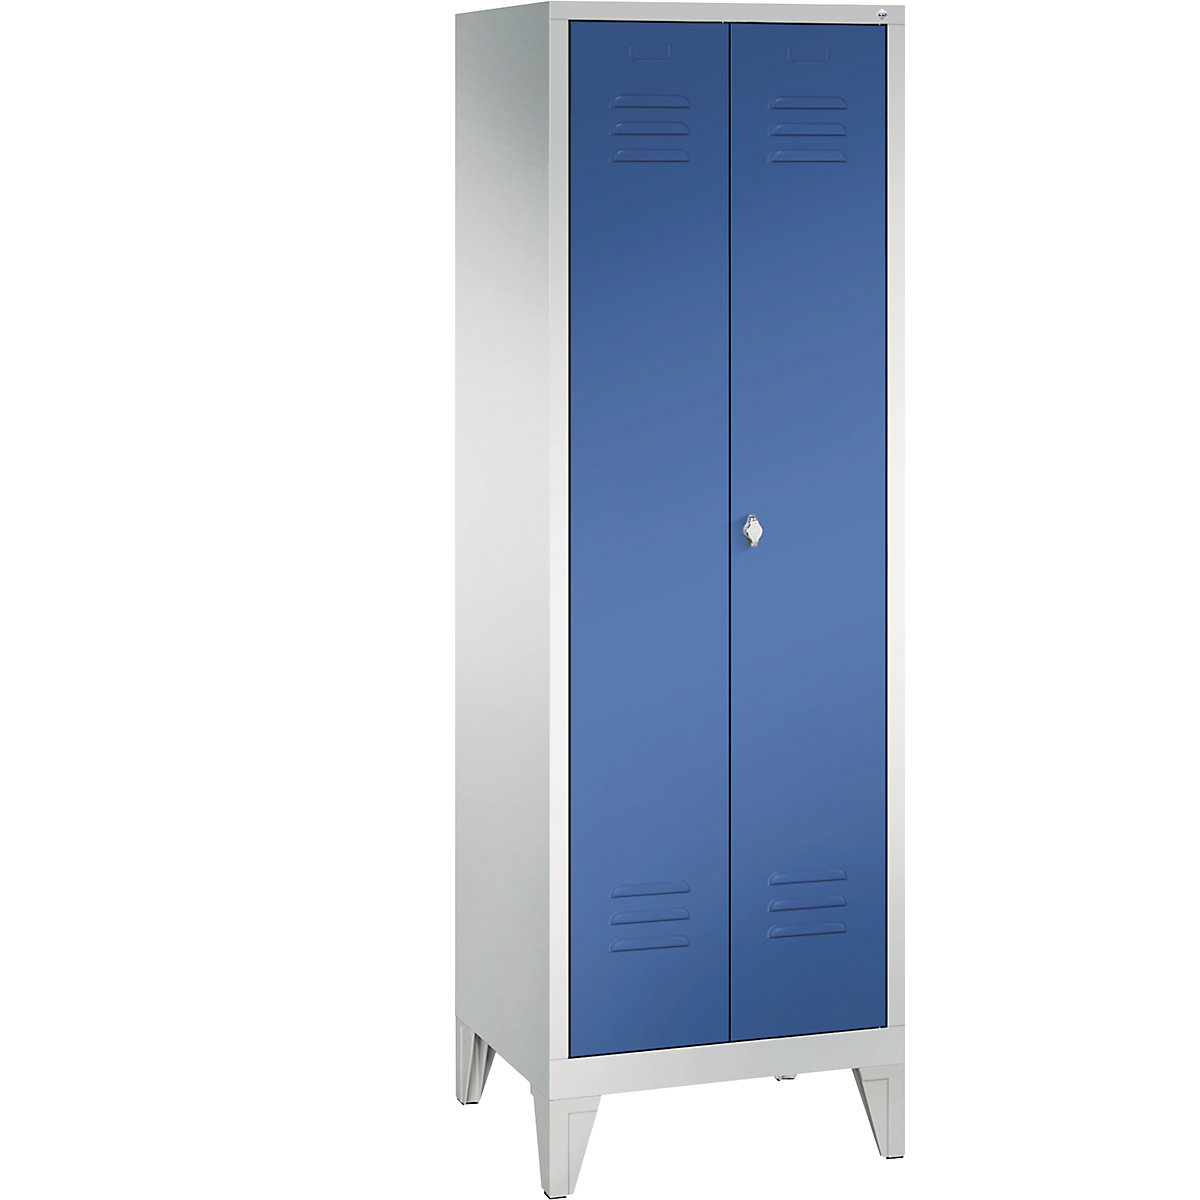 CLASSIC equipment cupboard with feet – C+P, 2 compartments, compartment width 300 mm, light grey / gentian blue-9